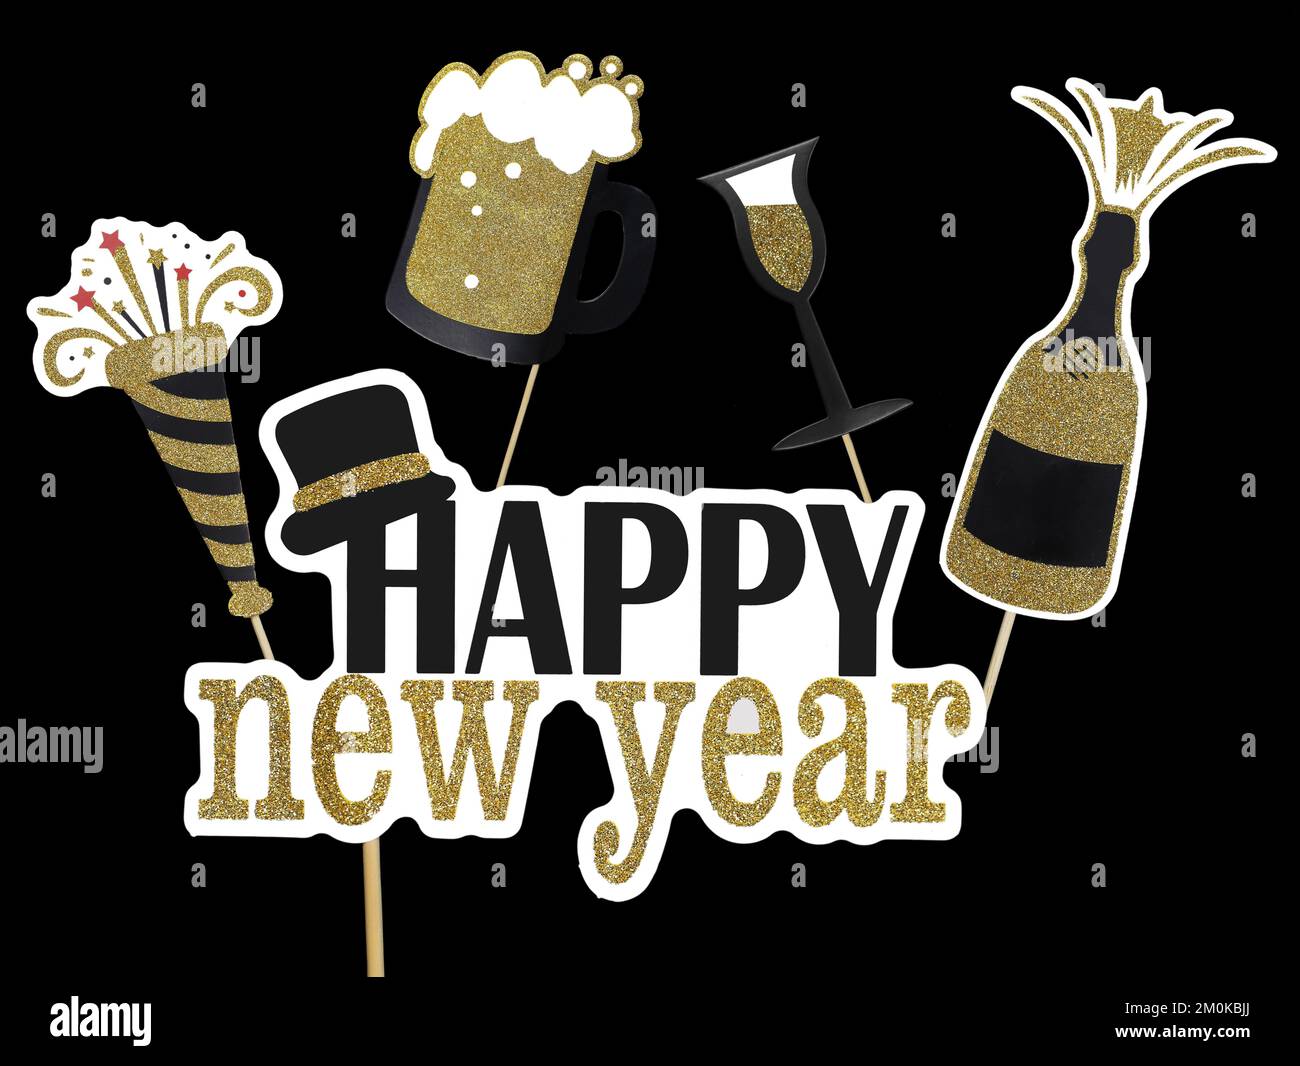 Happy New Year golden Text on Wooden Sticks with Popping Champagne and Frothy Beer, New Years Eve Party Concept Image Isolated on Black Background Stock Photo